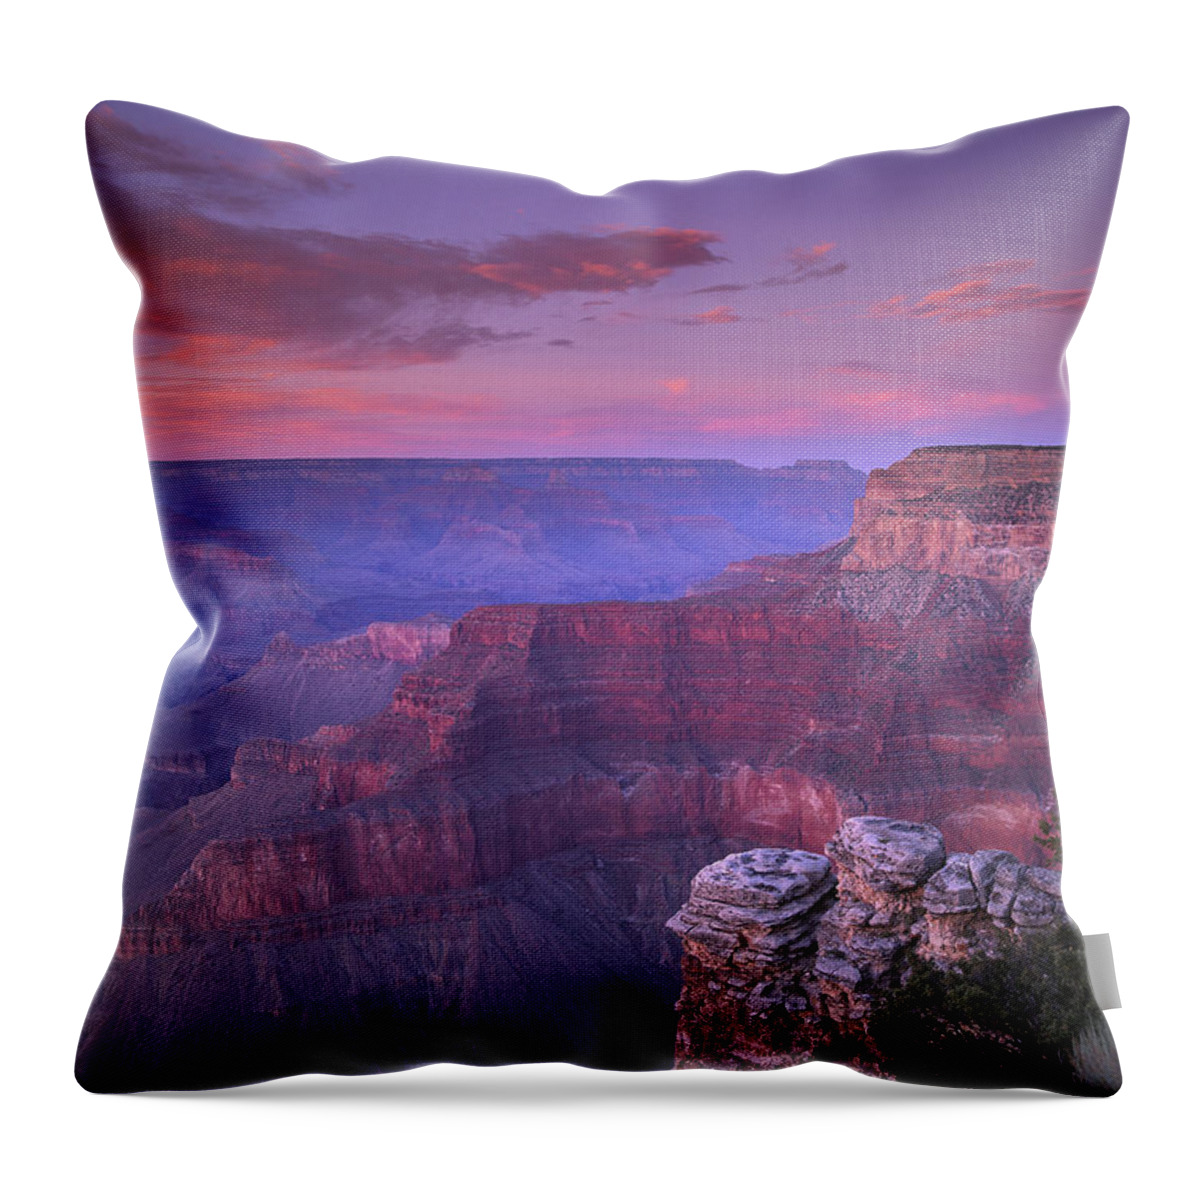 Feb0514 Throw Pillow featuring the photograph Grand Canyon South Rim From Pima Point by Tim Fitzharris